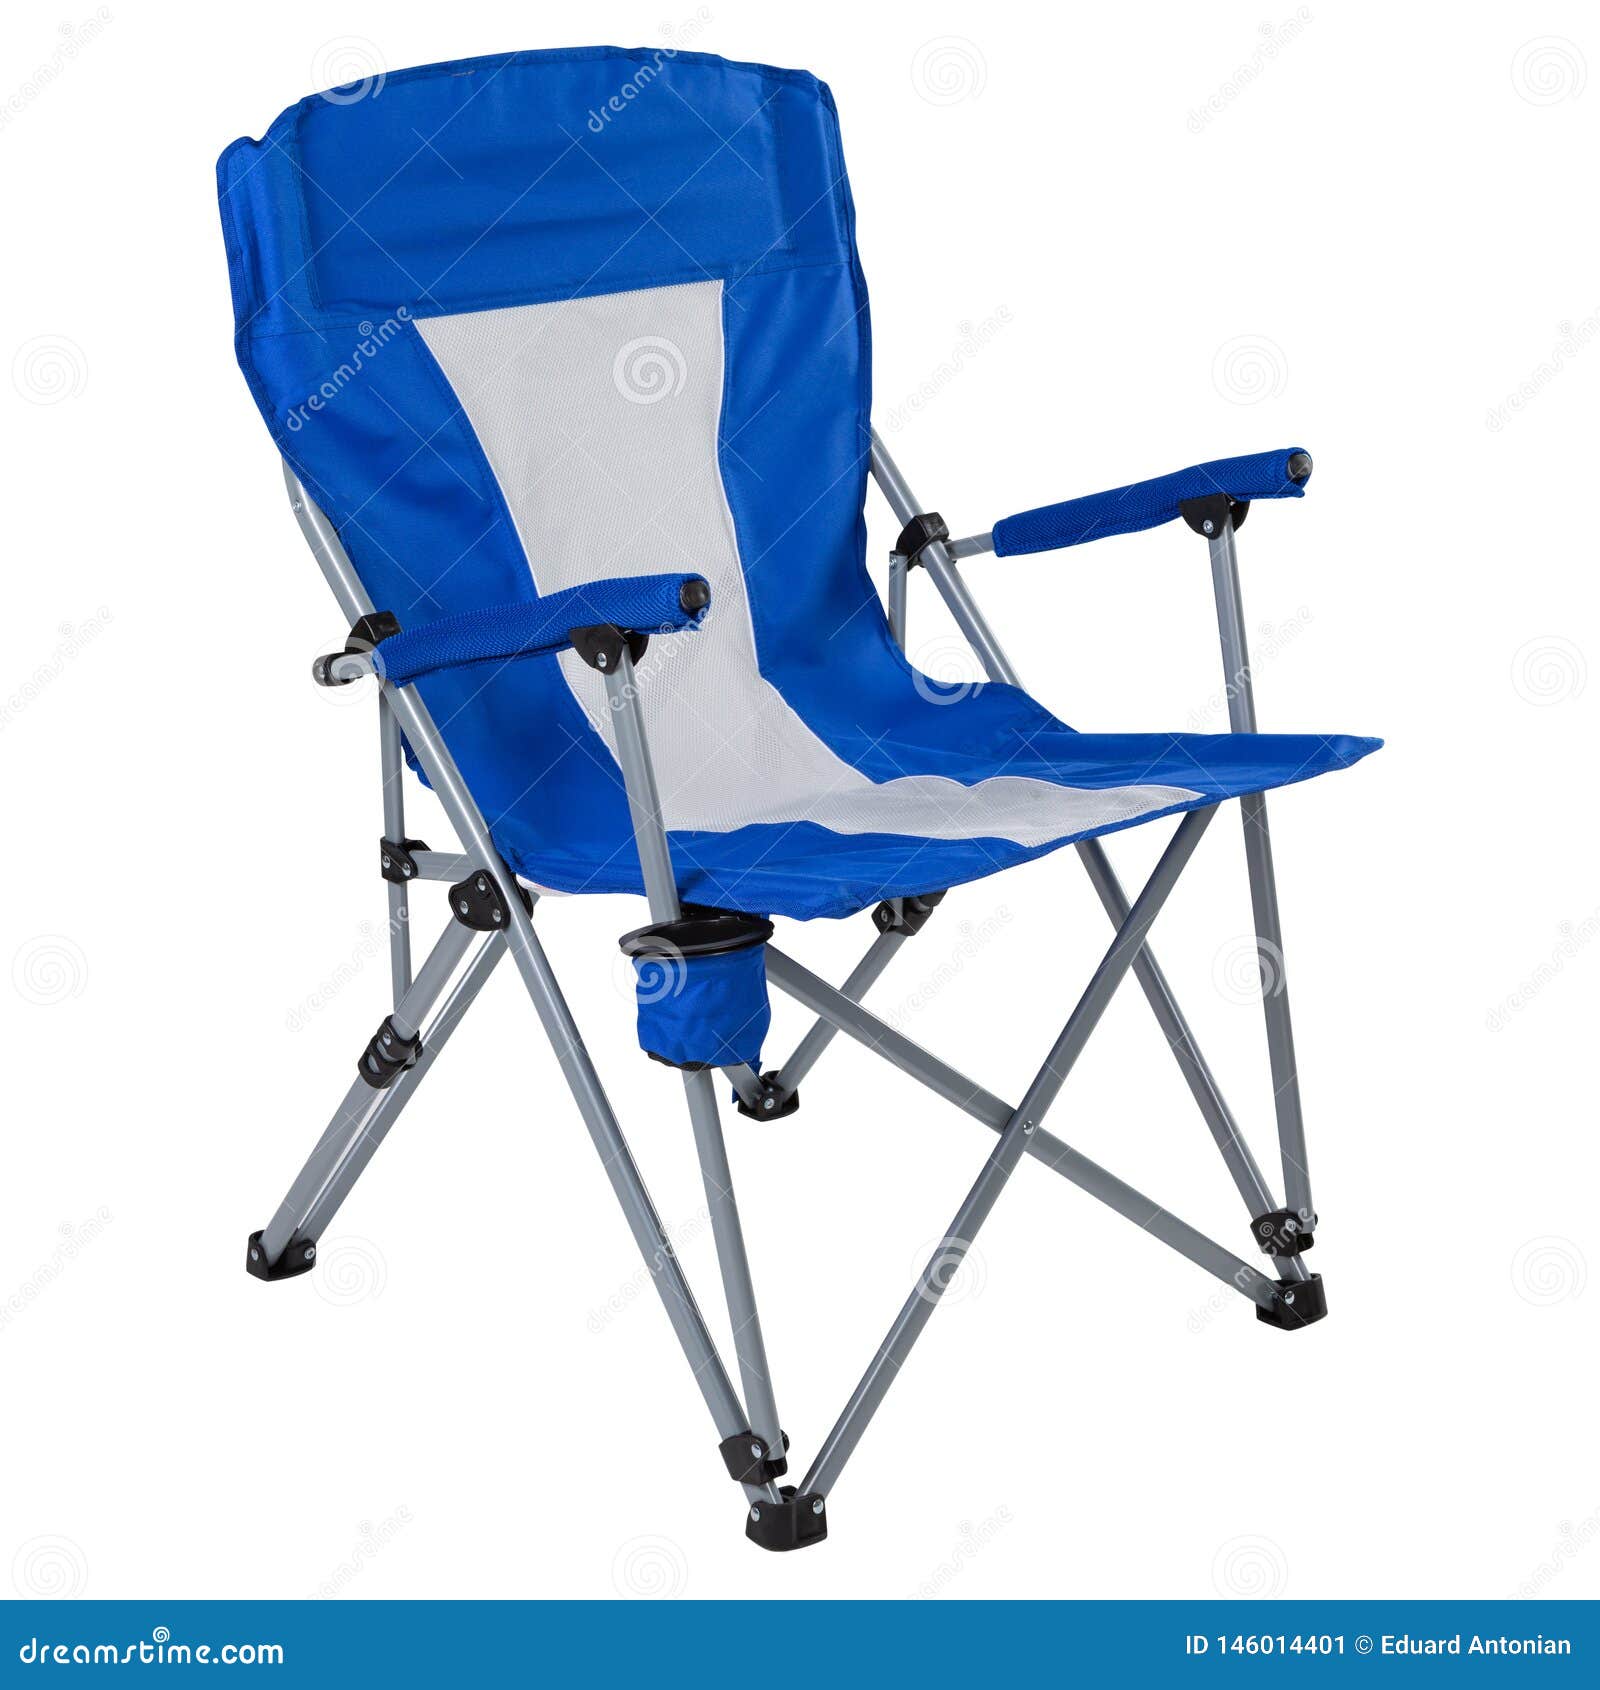 blue folding chair for fishing or camping, on a white background